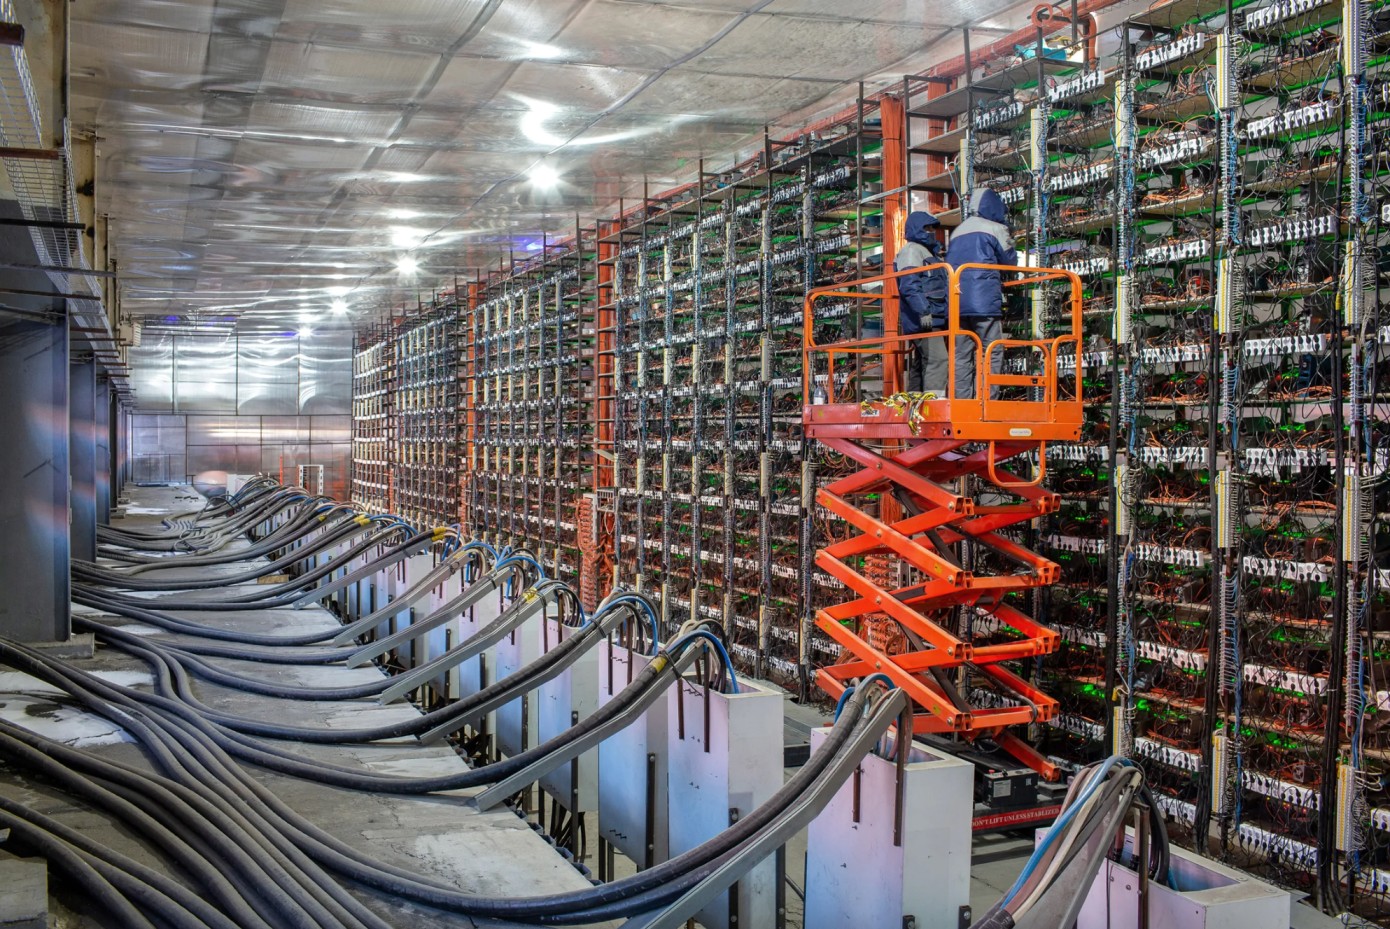 Bitcoin Mining: How Much Electricity It Takes and Why People Are Worried - CNET